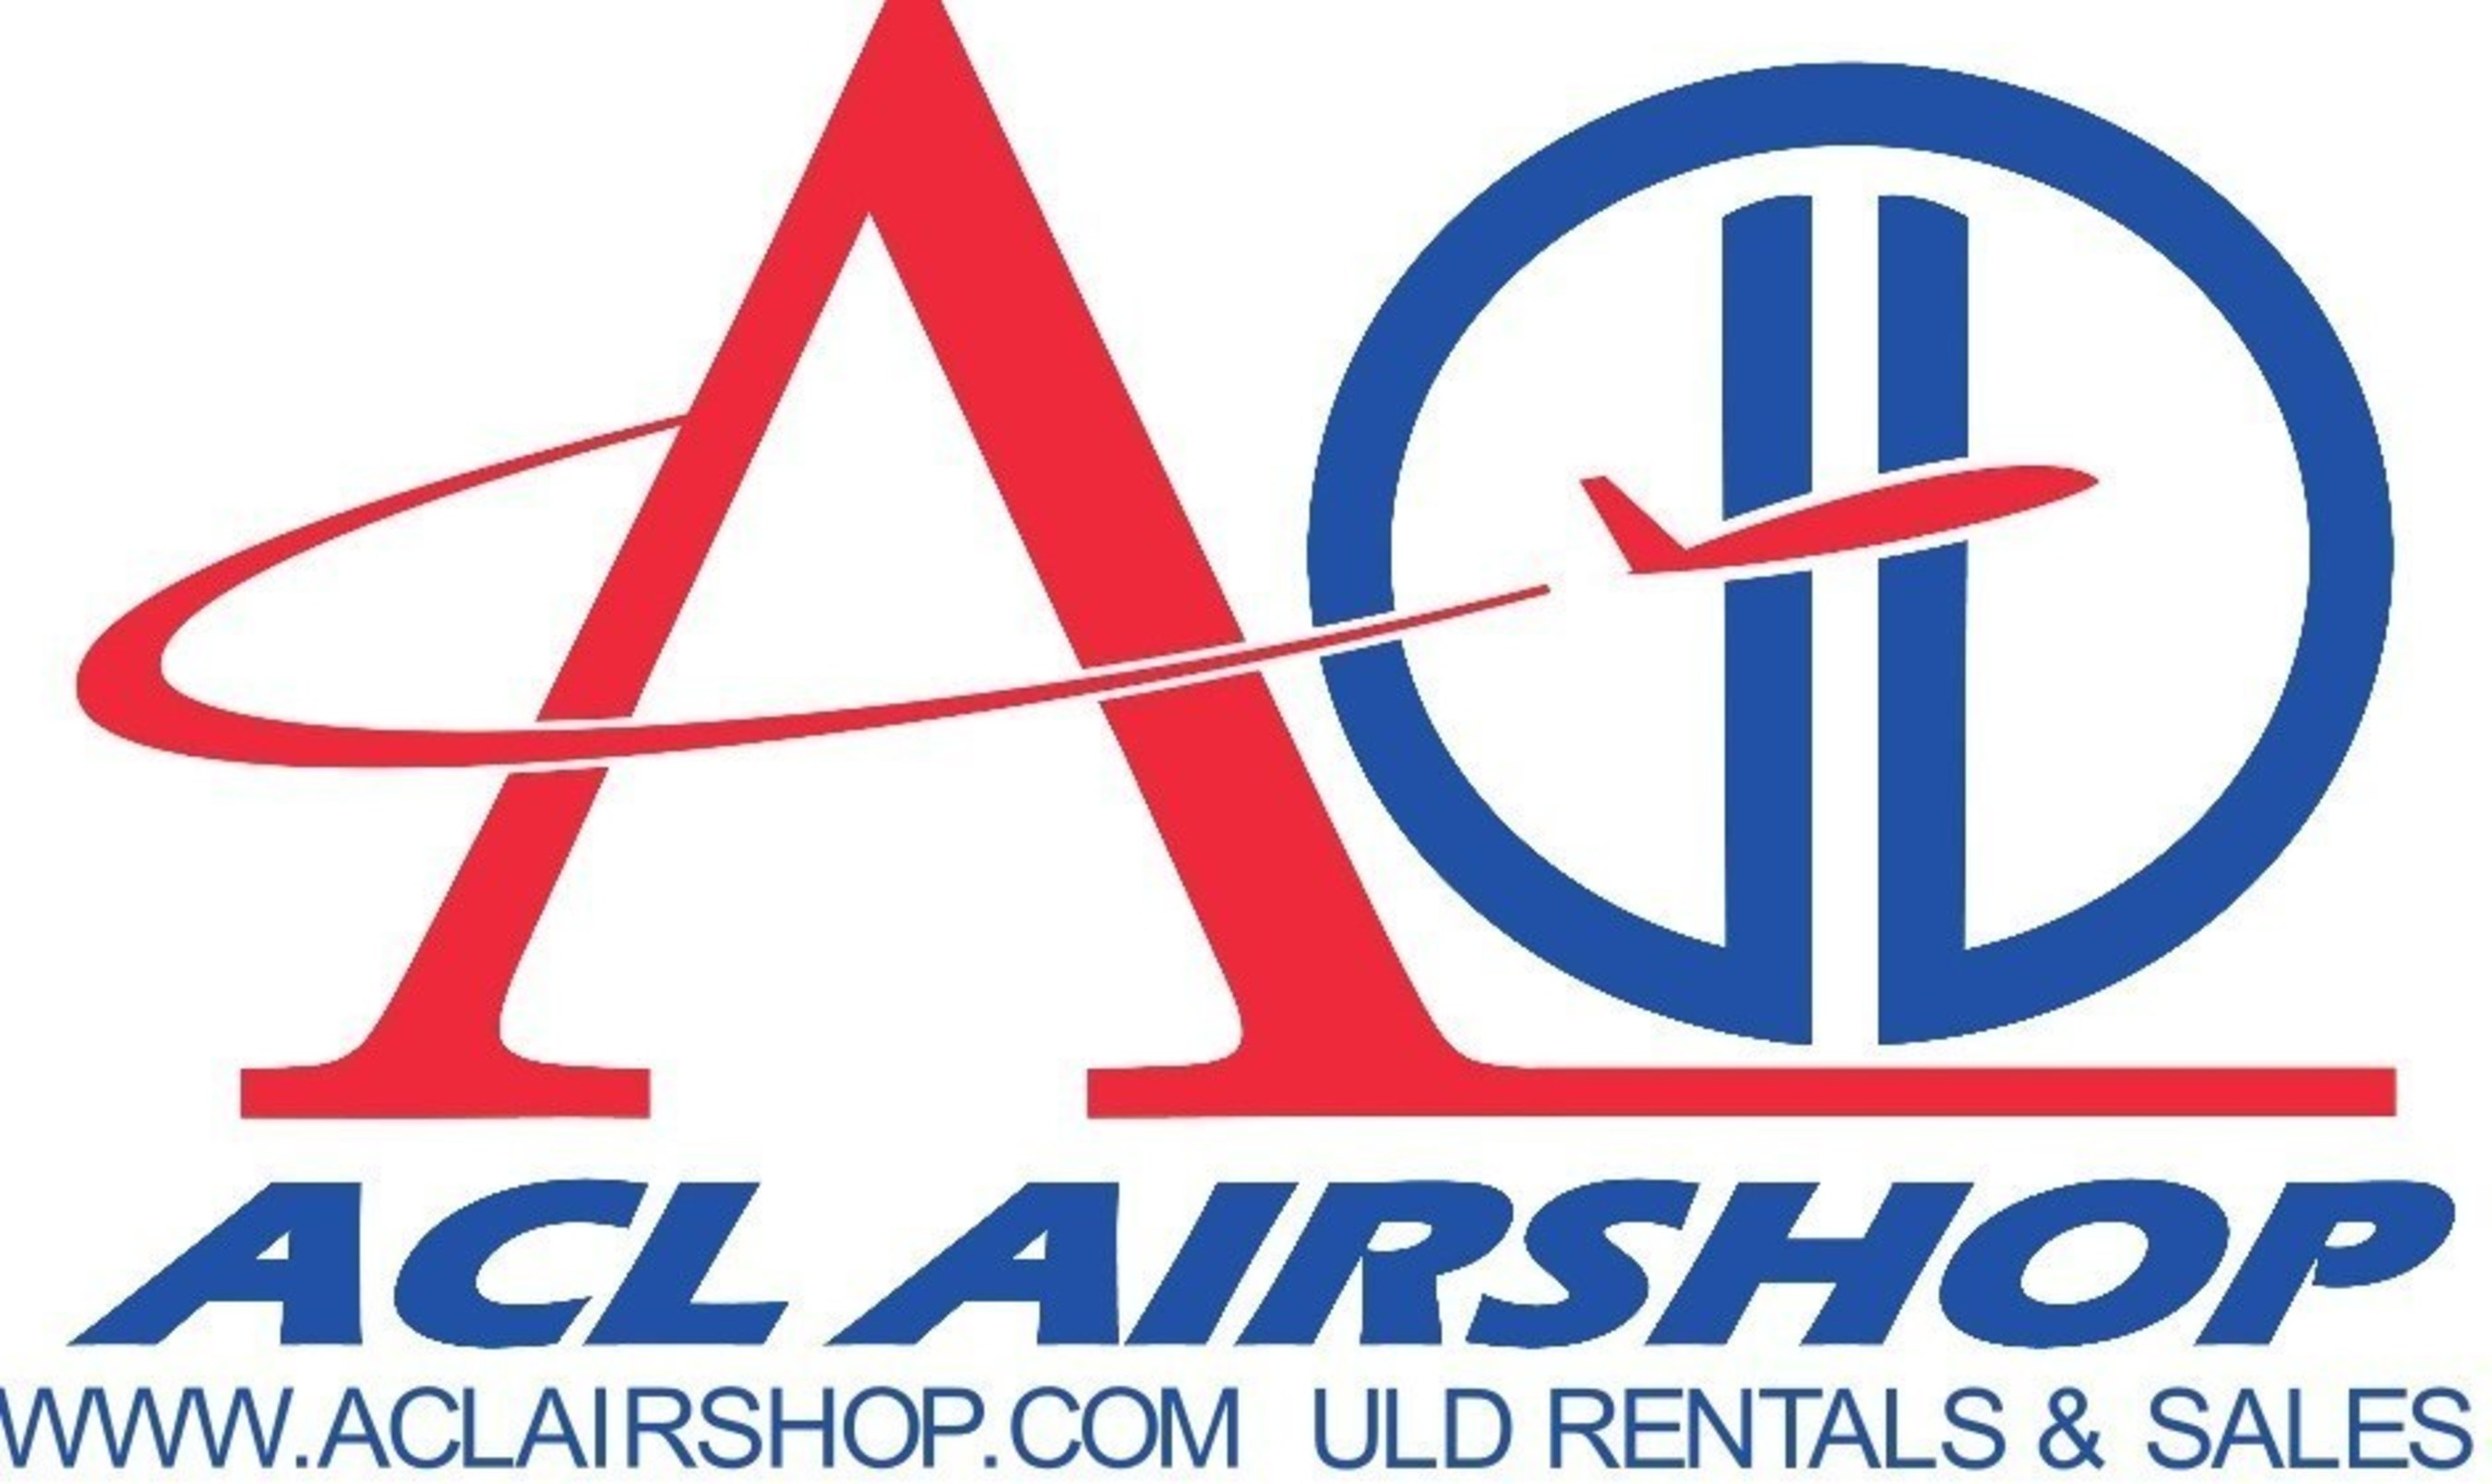 ACL AirShop is a global leader in air cargo products and services.  For more information visit www.aclairshop.com